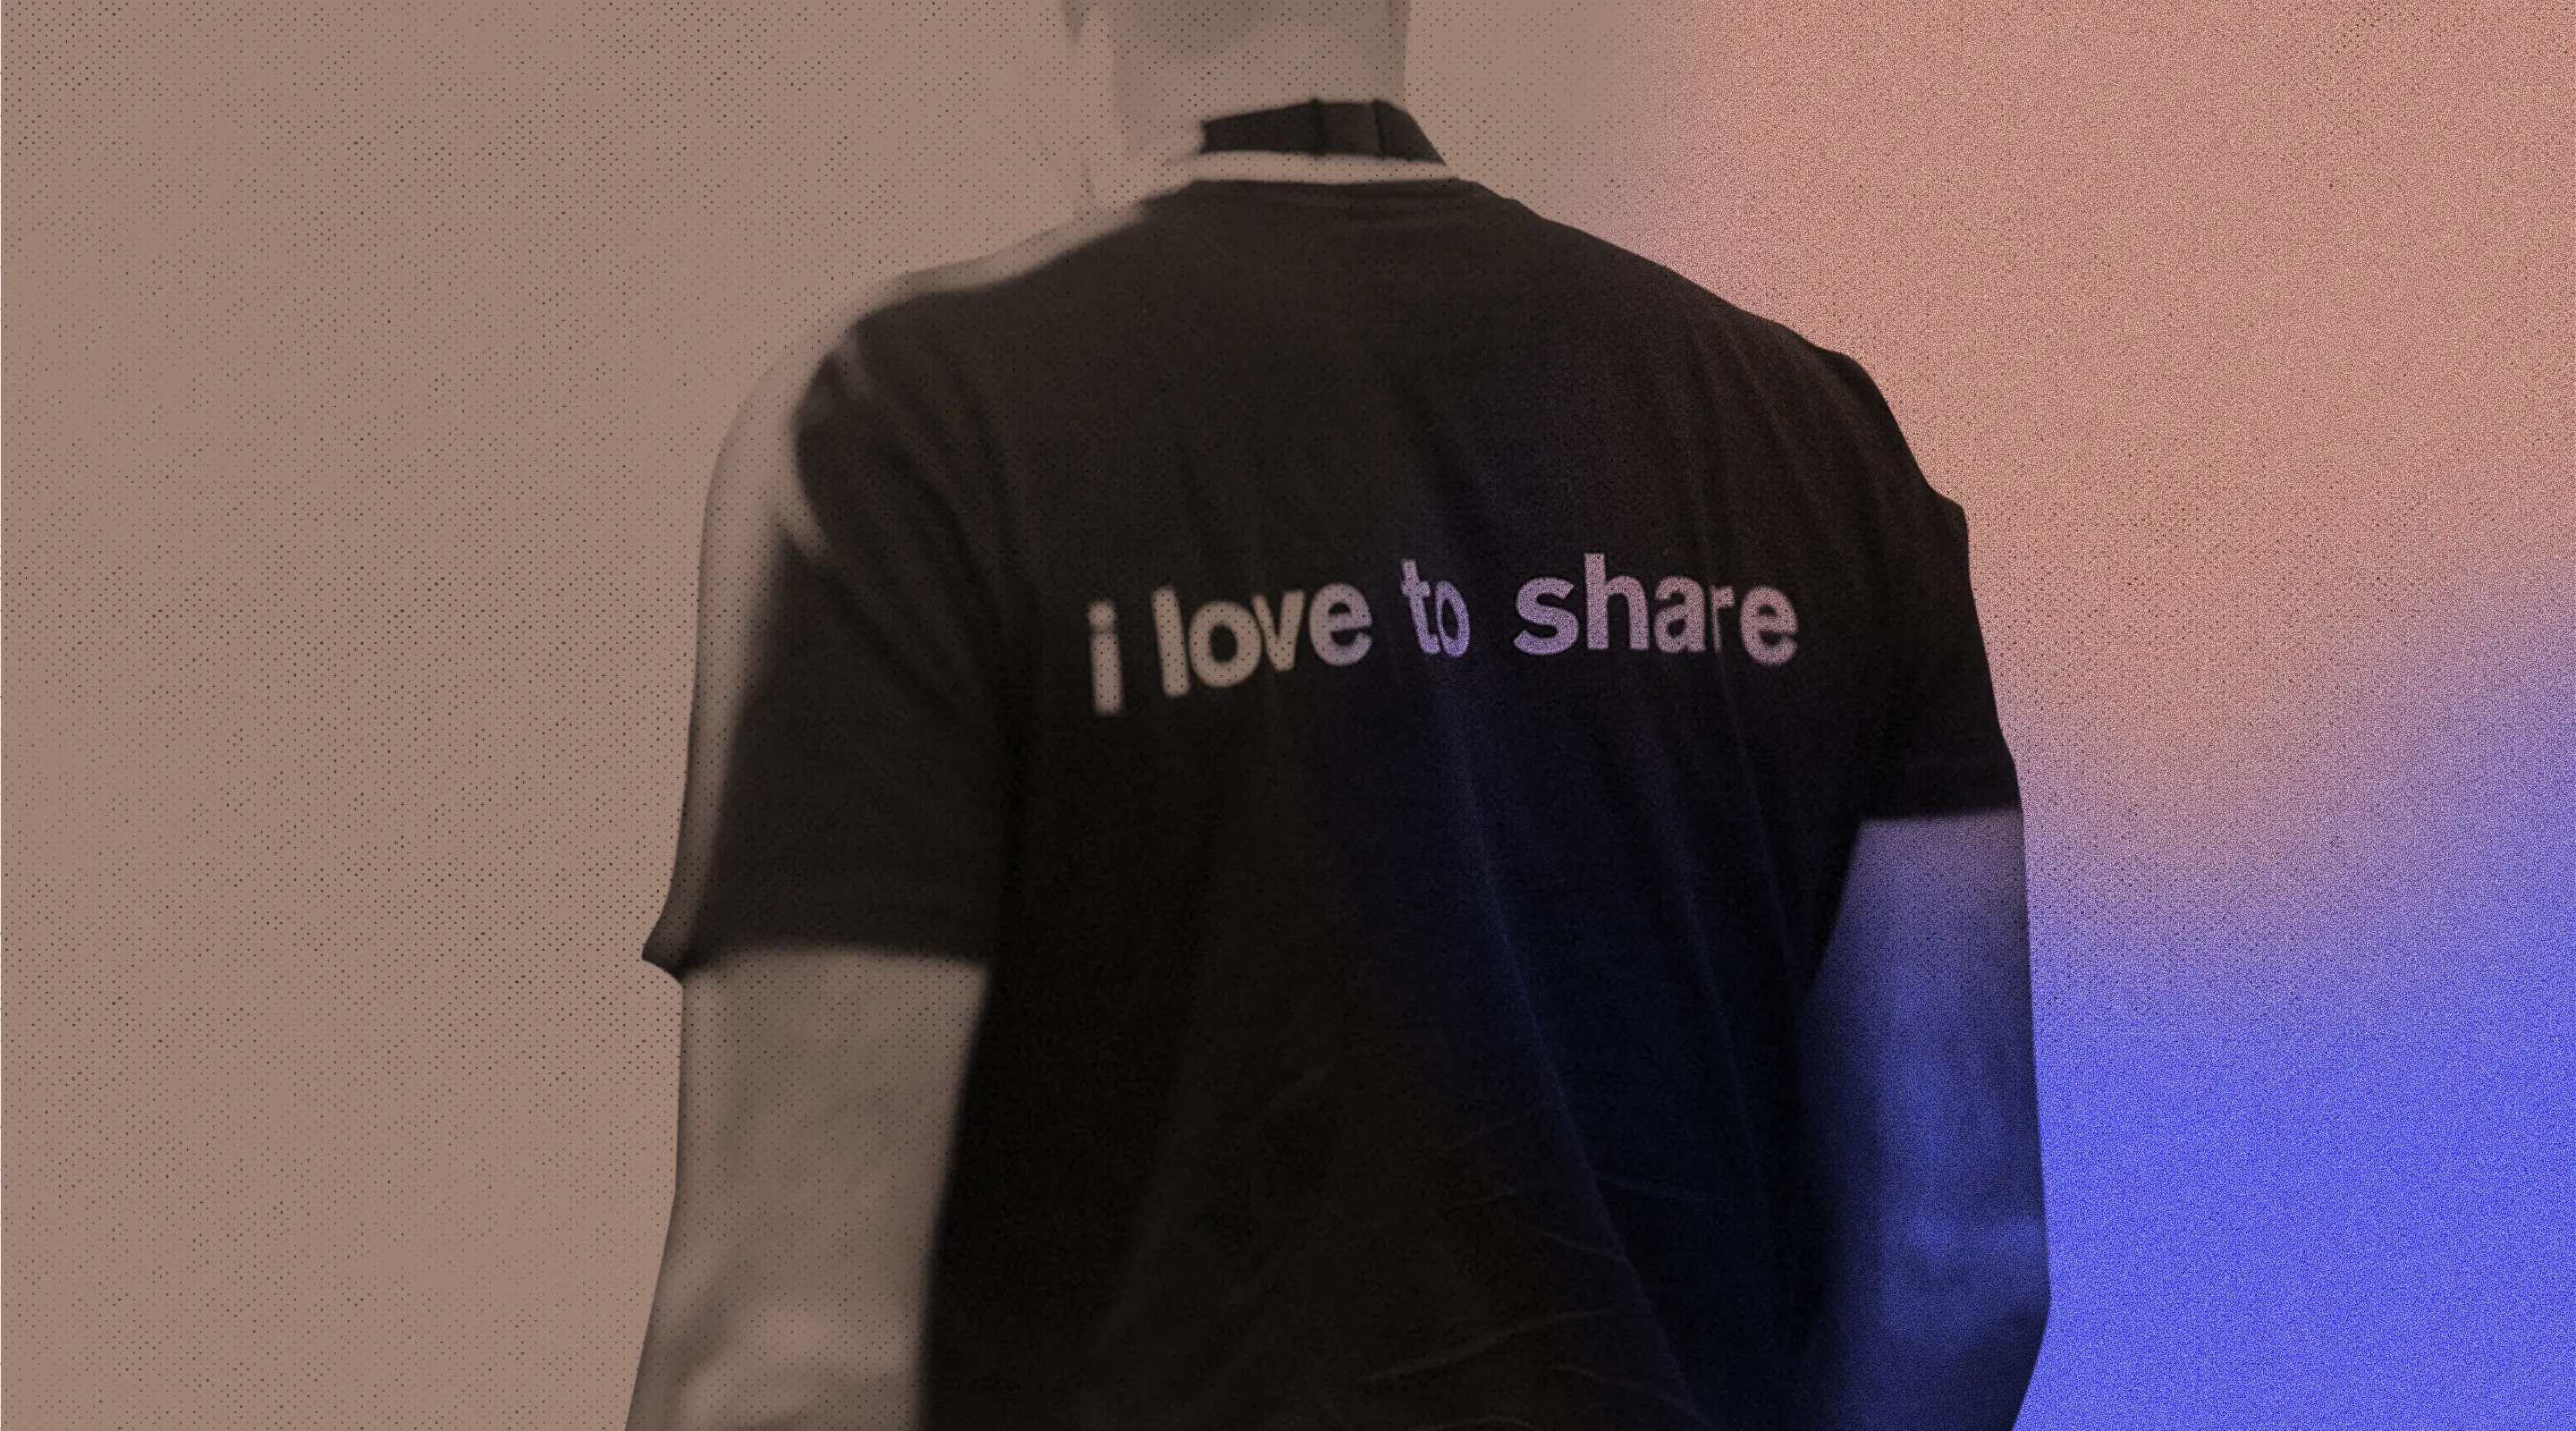 the back of a t-shirt is shown with the words "I love to share" written across the back